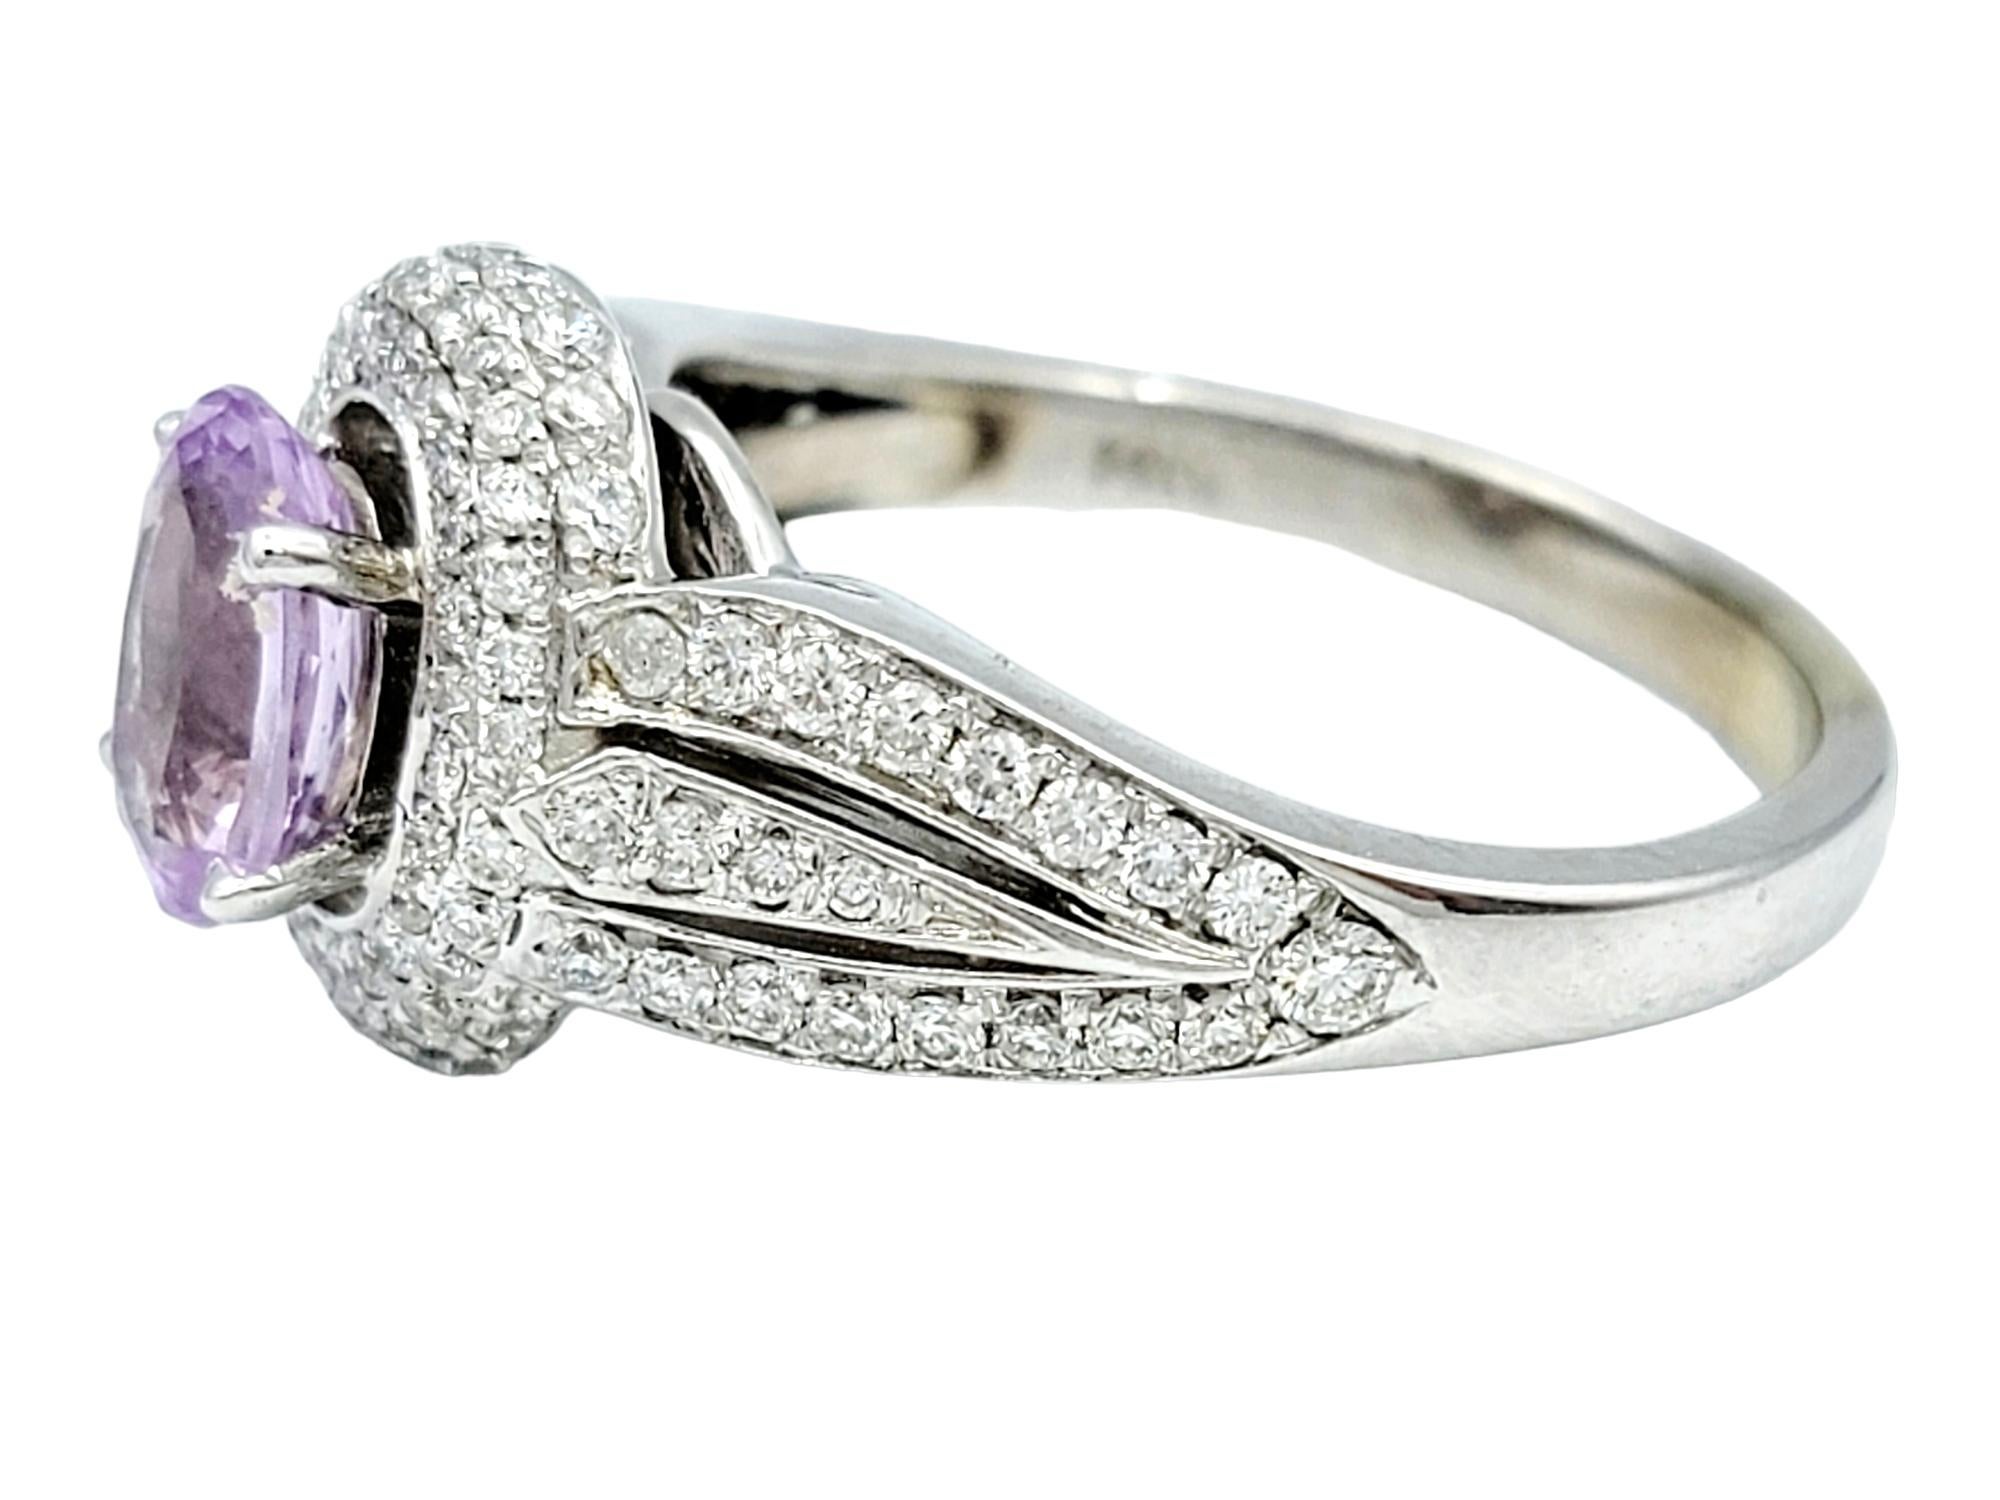 Oval Cut Lavender Spinel and Pavé Diamond Halo Ring Set in 14 Karat White Gold In Good Condition For Sale In Scottsdale, AZ